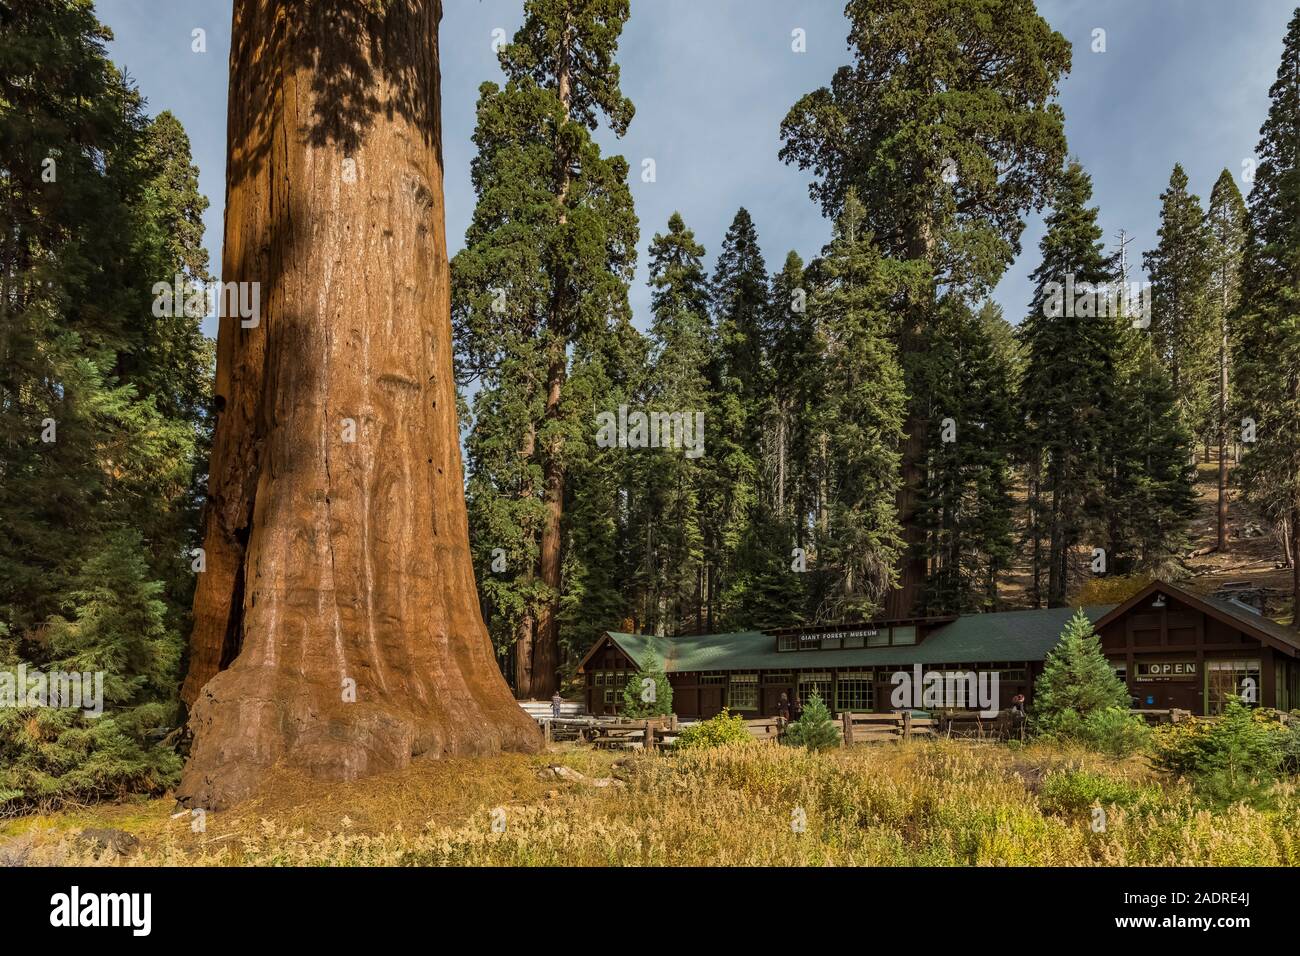 Sequoia National Park,California,CA,Giant Forest Village,Sentinel Tree,1957